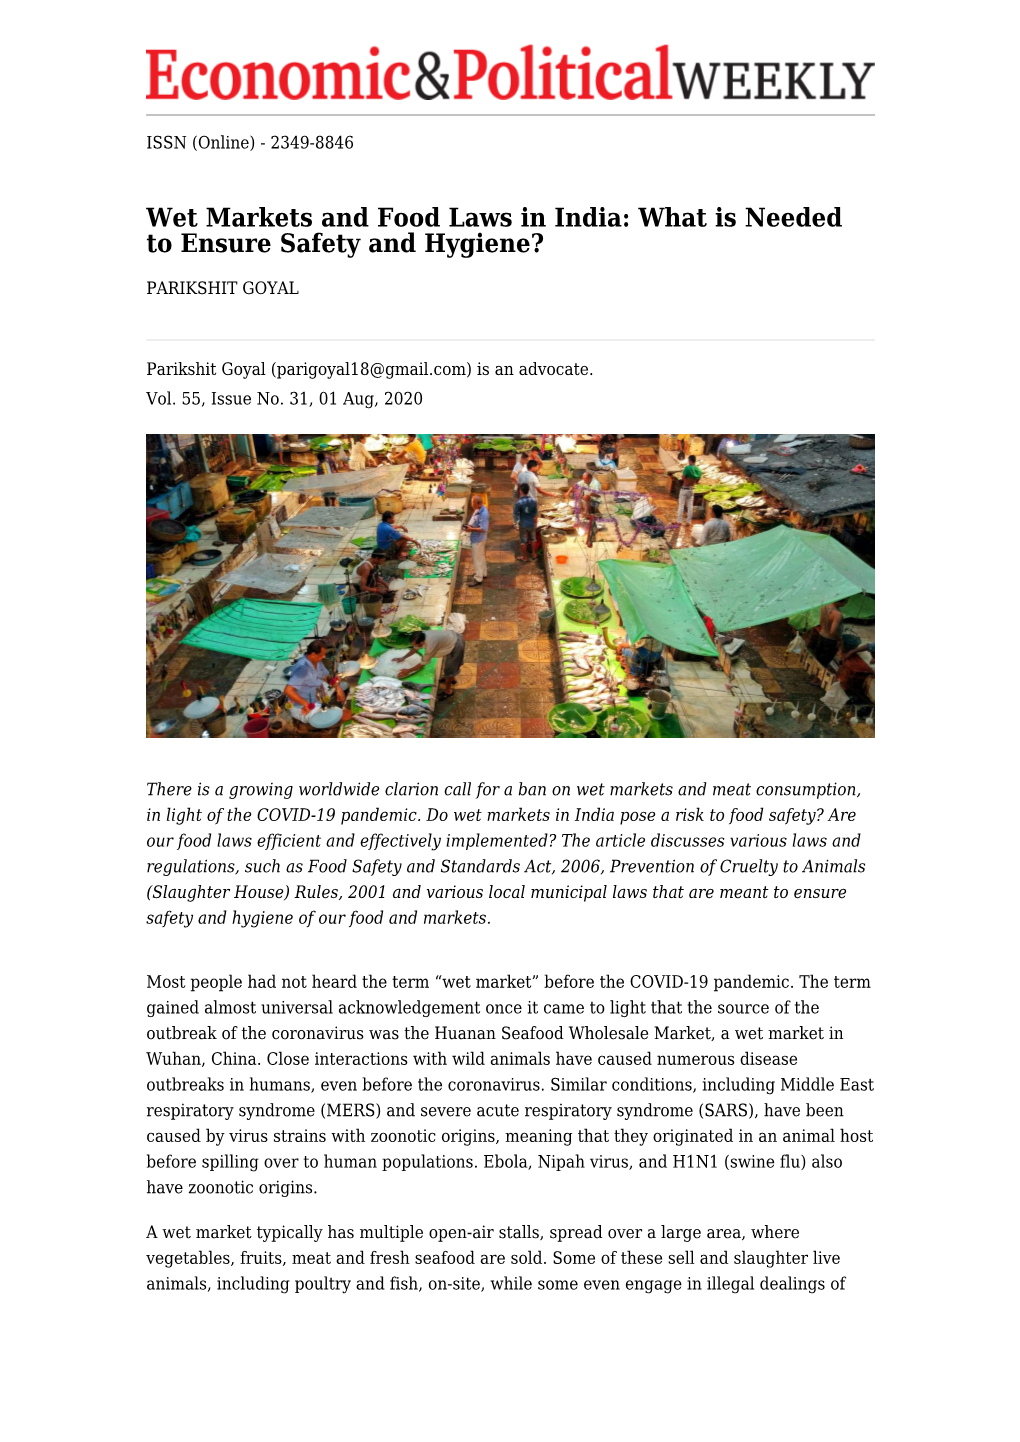 Wet Markets and Food Laws in India: What Is Needed to Ensure Safety and Hygiene?